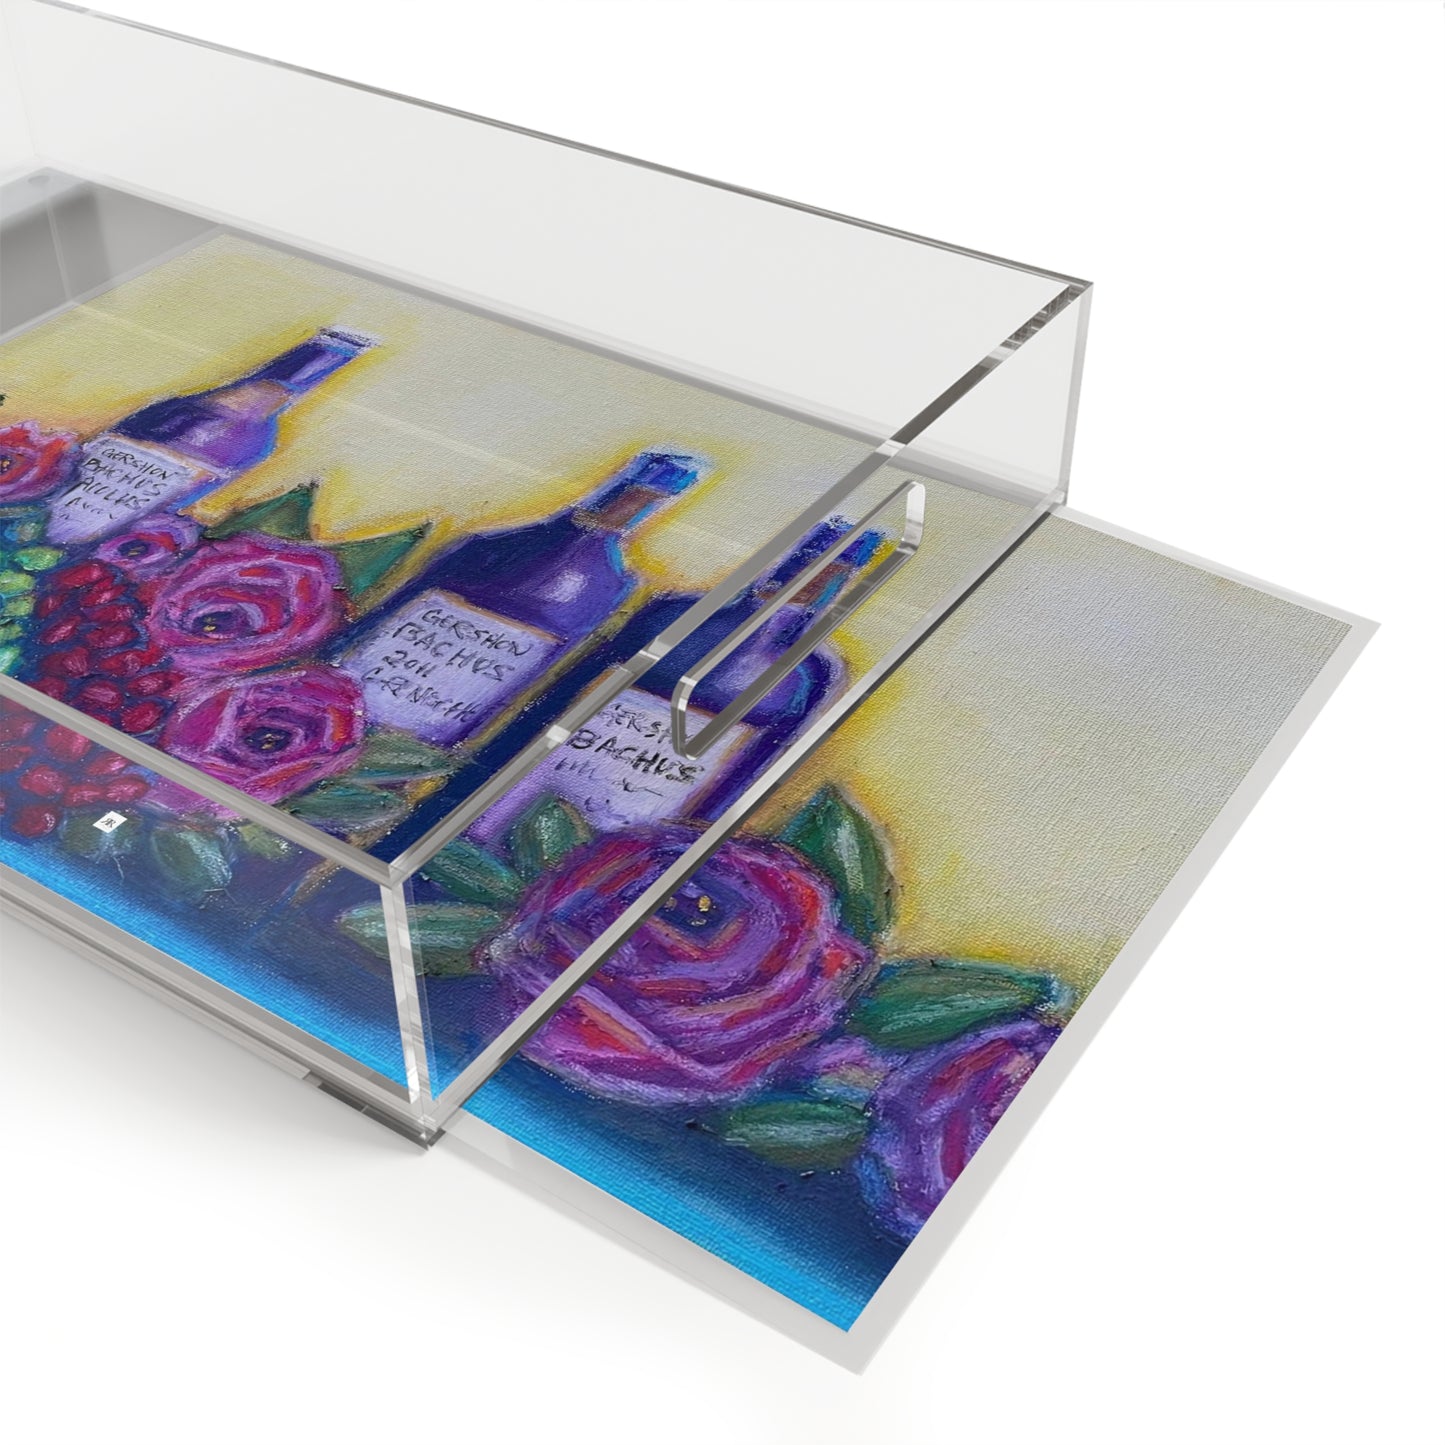 GBV Wine and Roses  Acrylic Tray